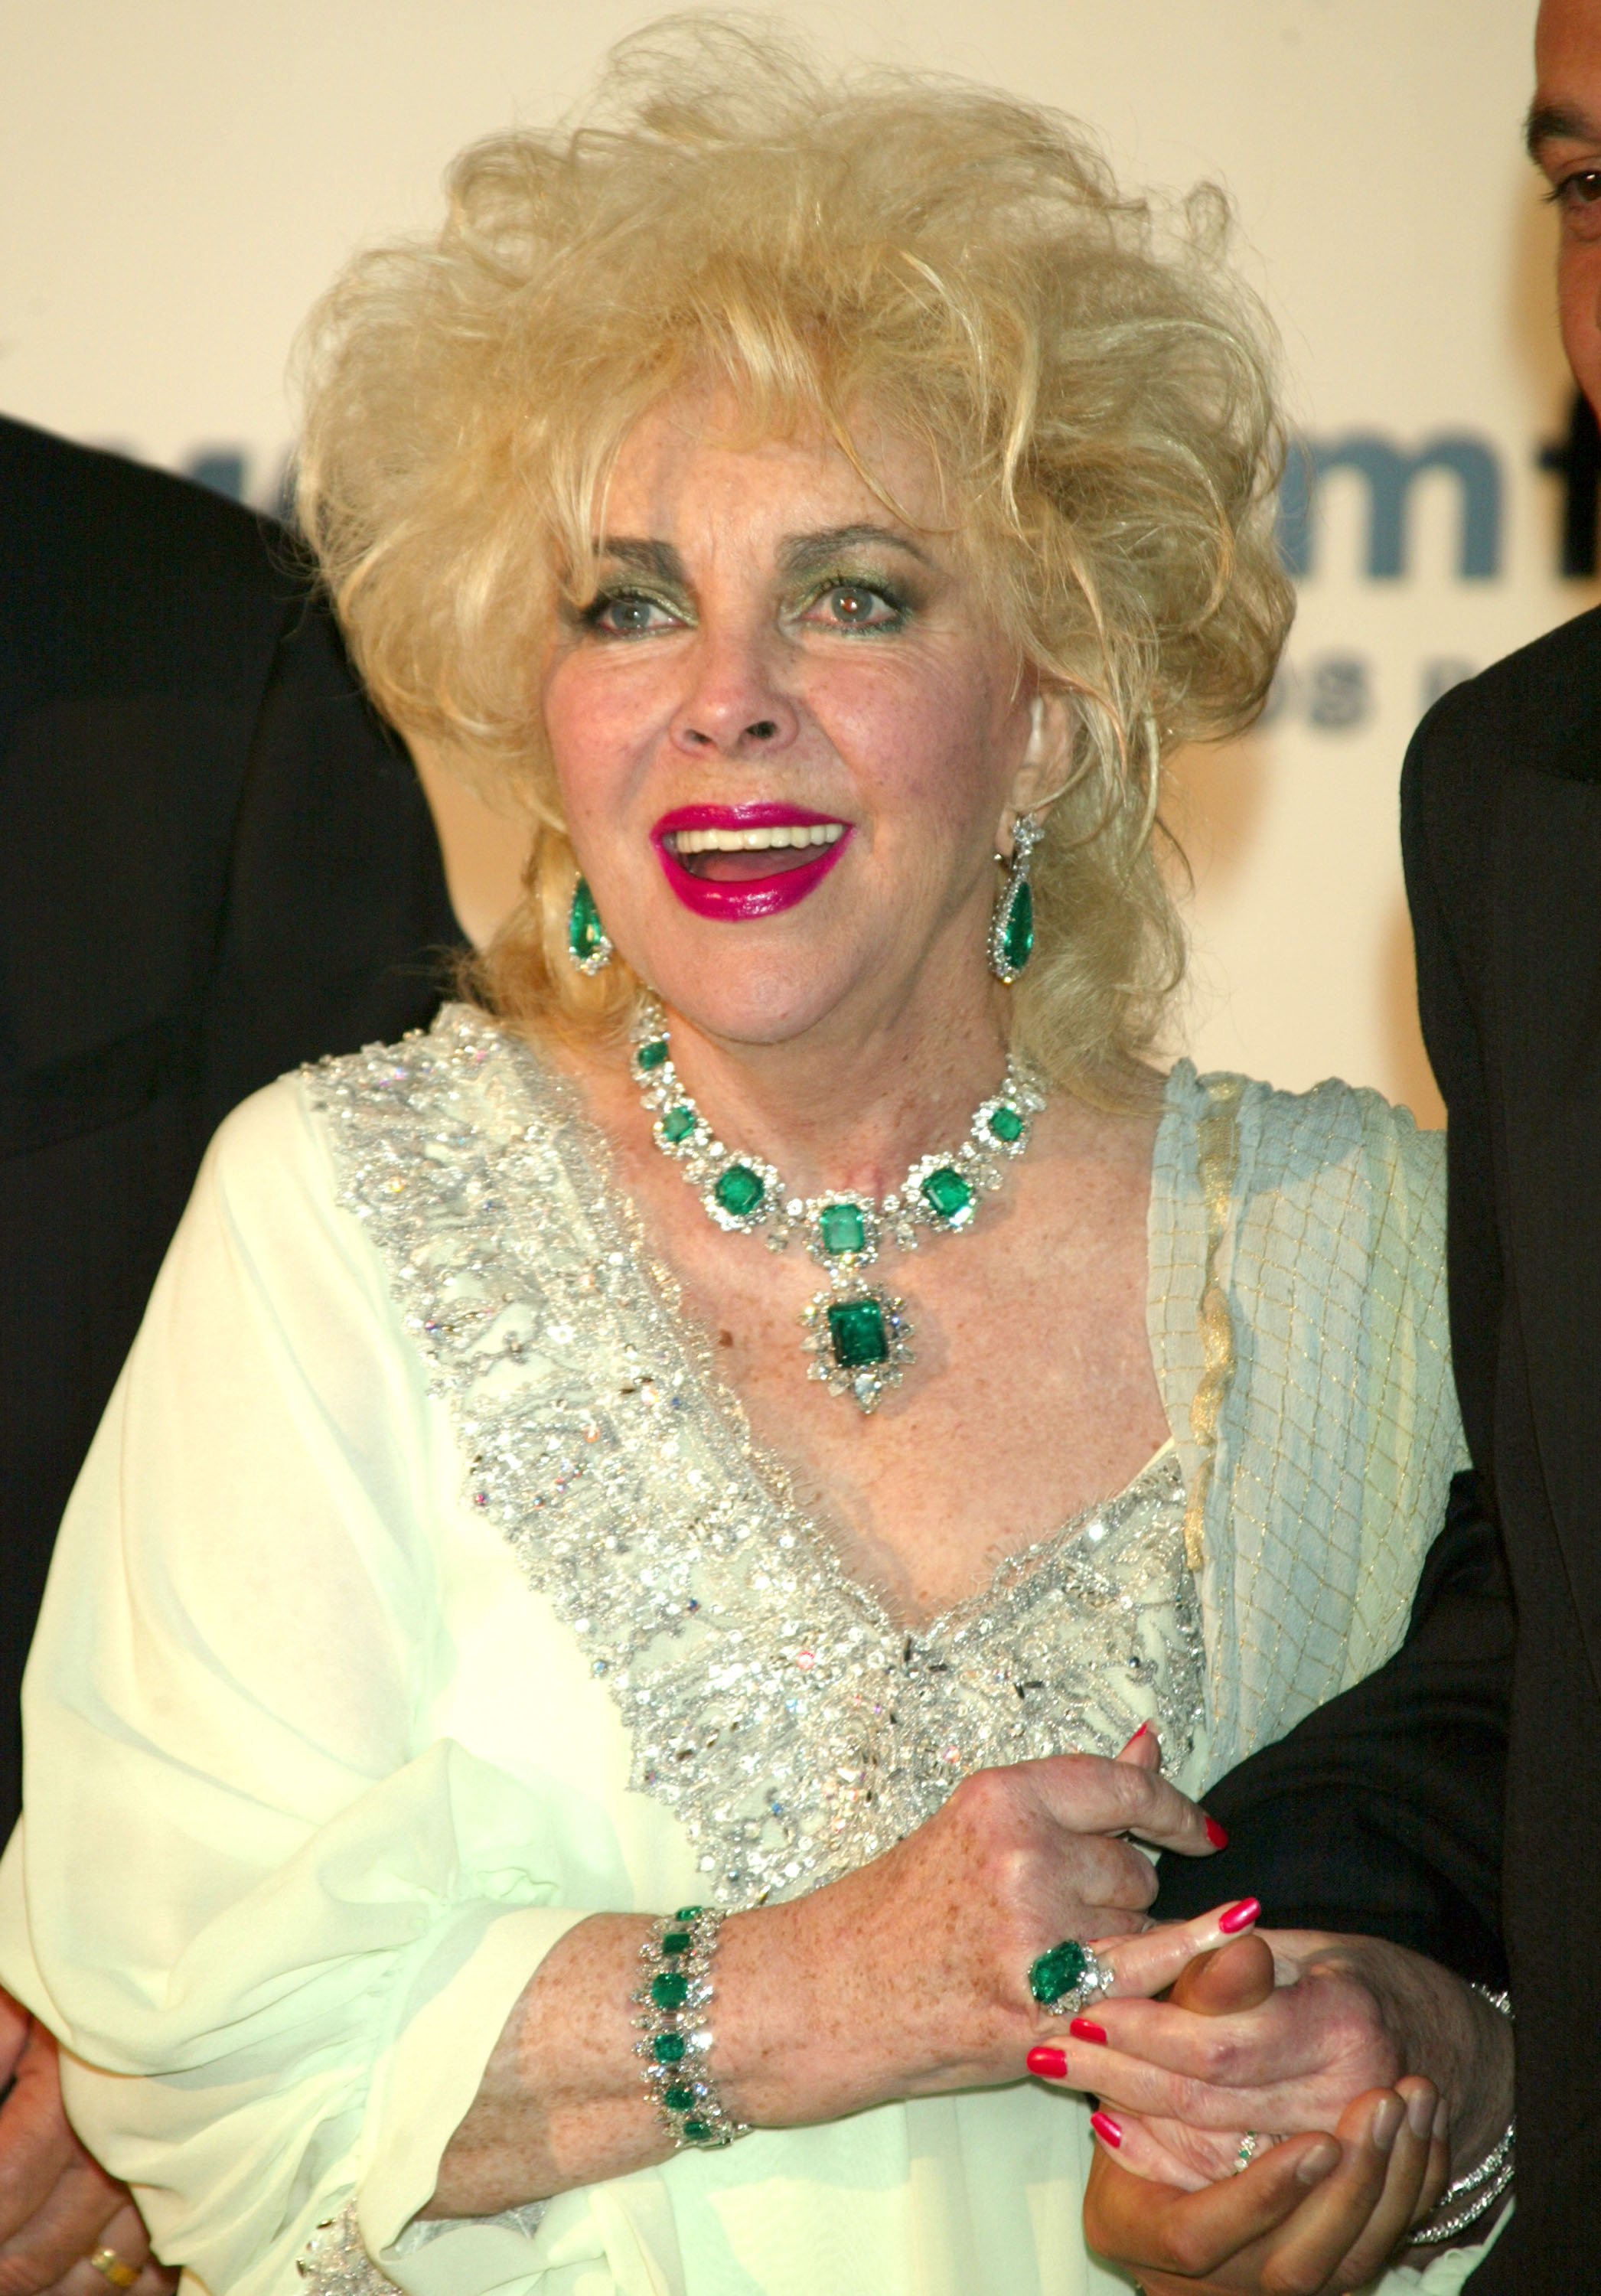 Actress Elizabeth Taylor on May 22, 2003 in Cannes, France. | Source: Getty Images